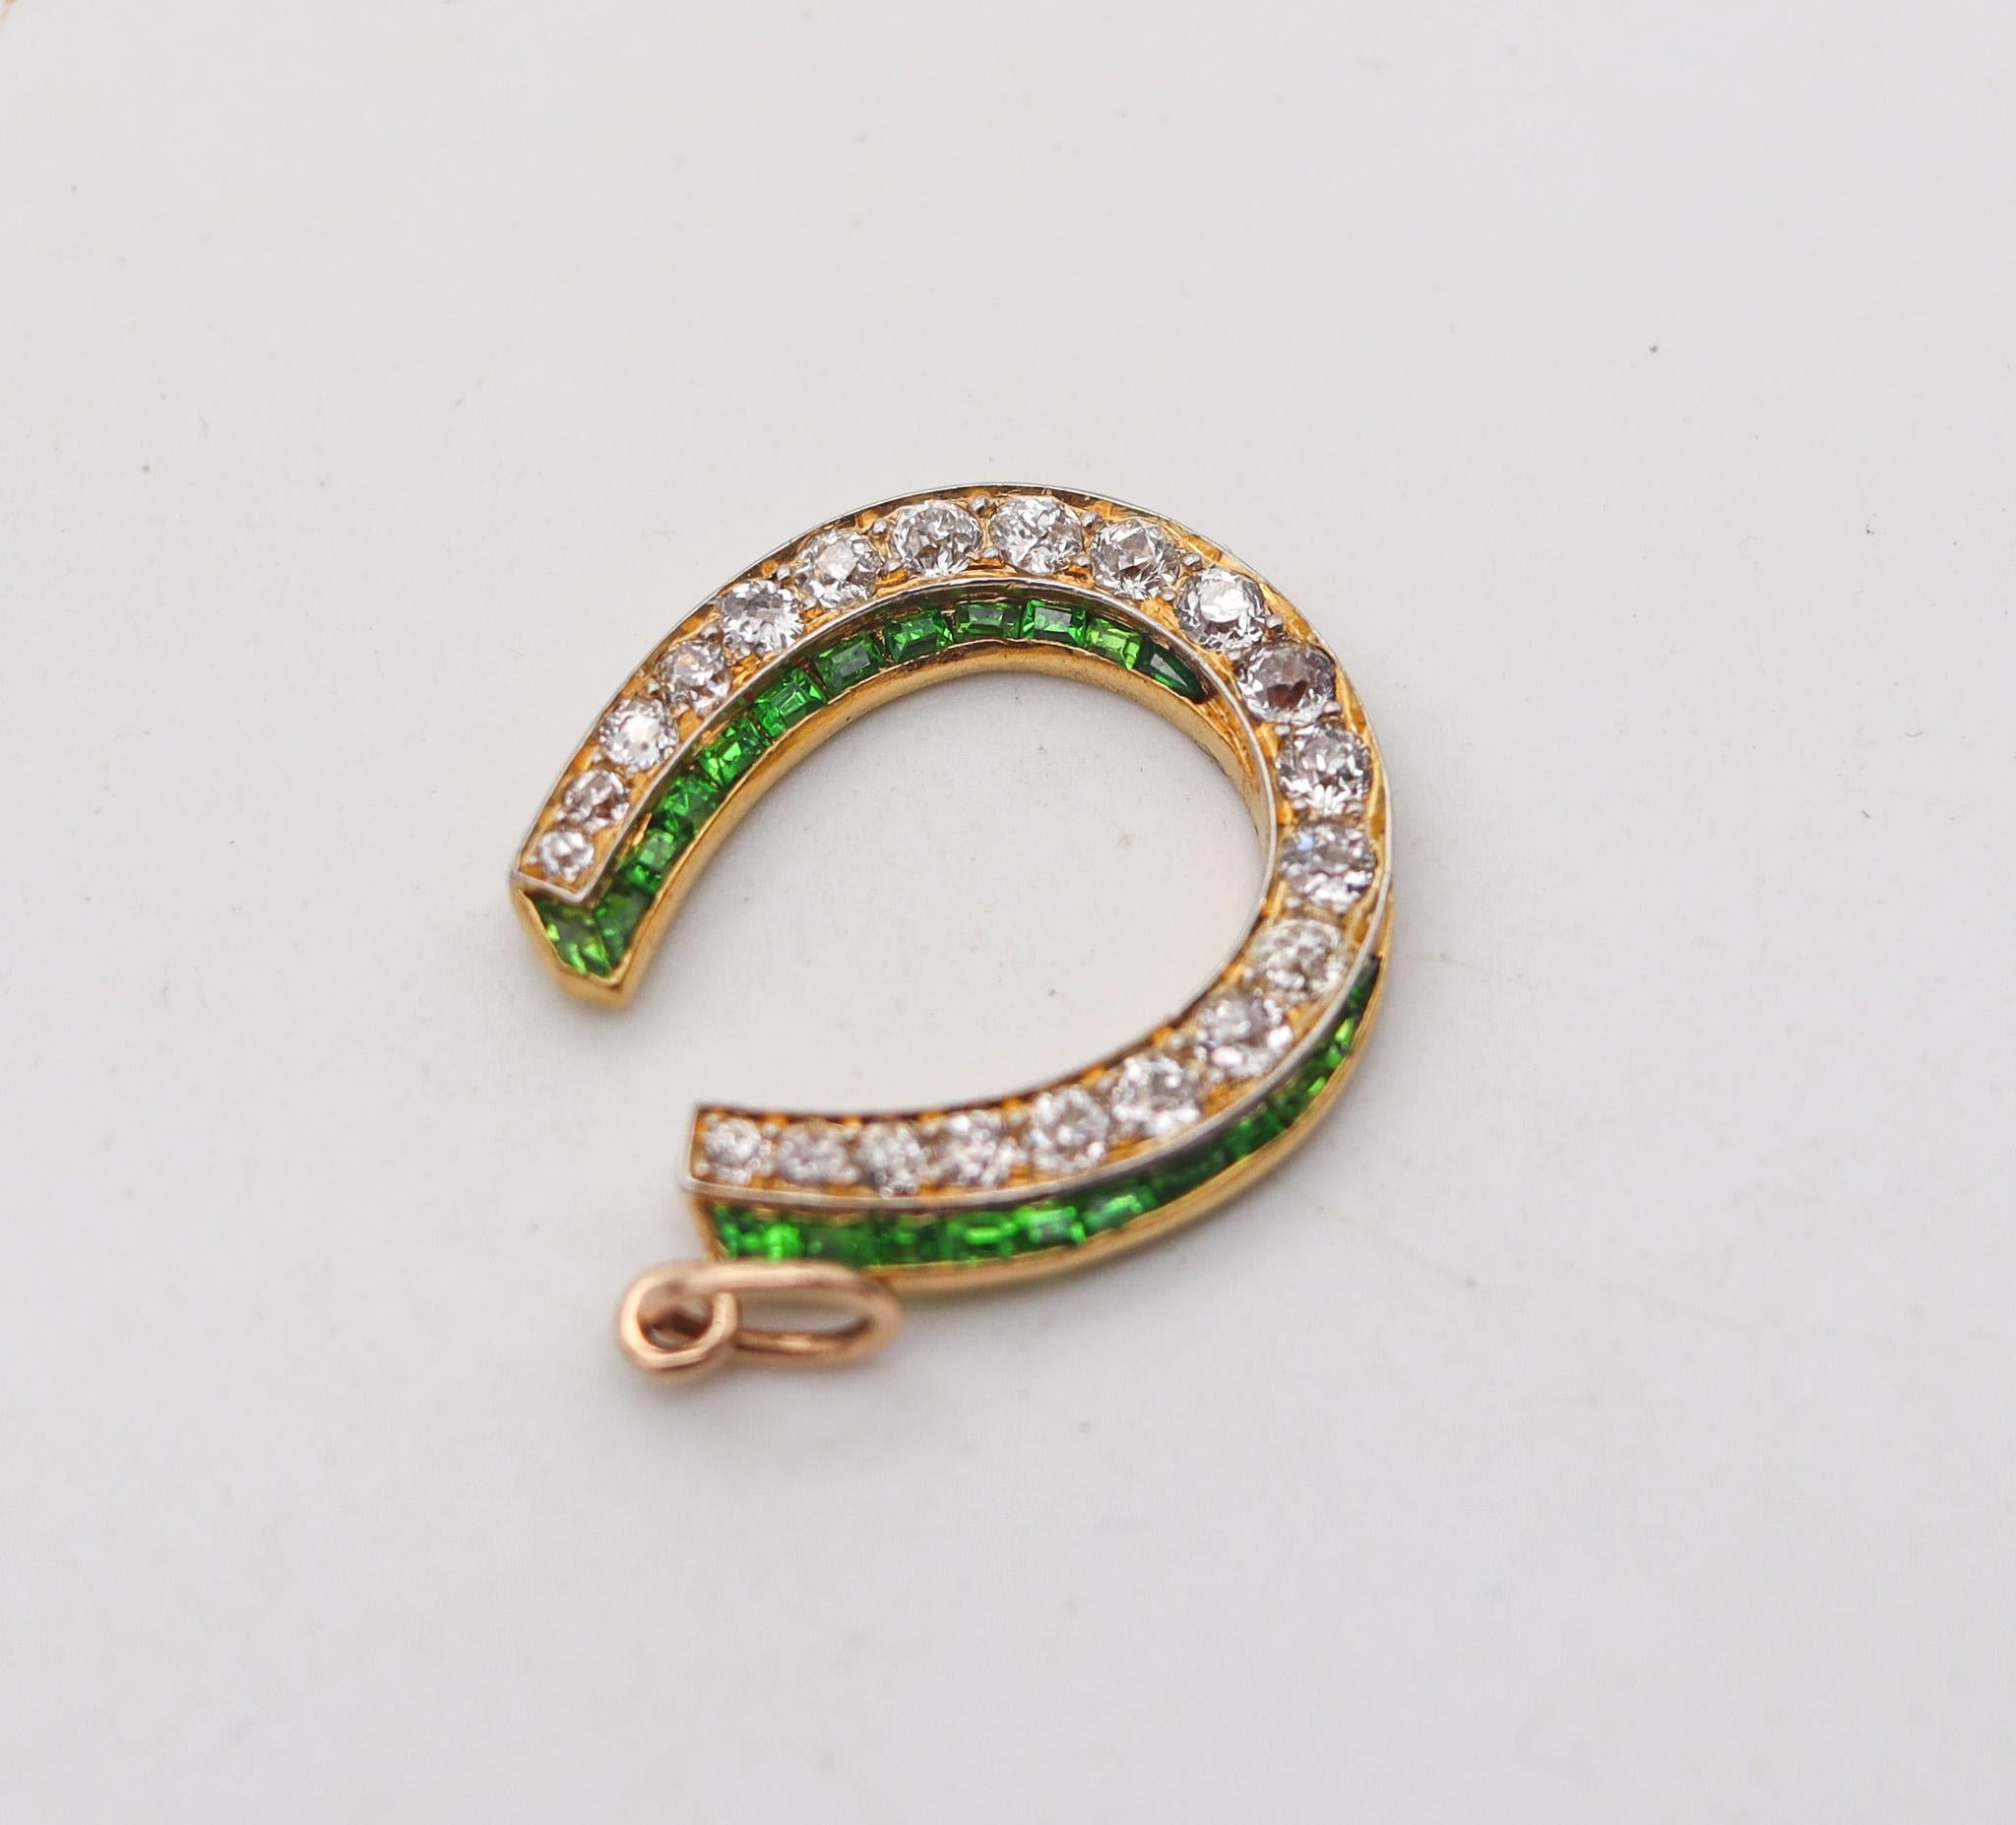 Mixed Cut Edwardian 1900 Horseshoe Lucky Pendant In 18Kt Gold With Demantoids And Diamonds